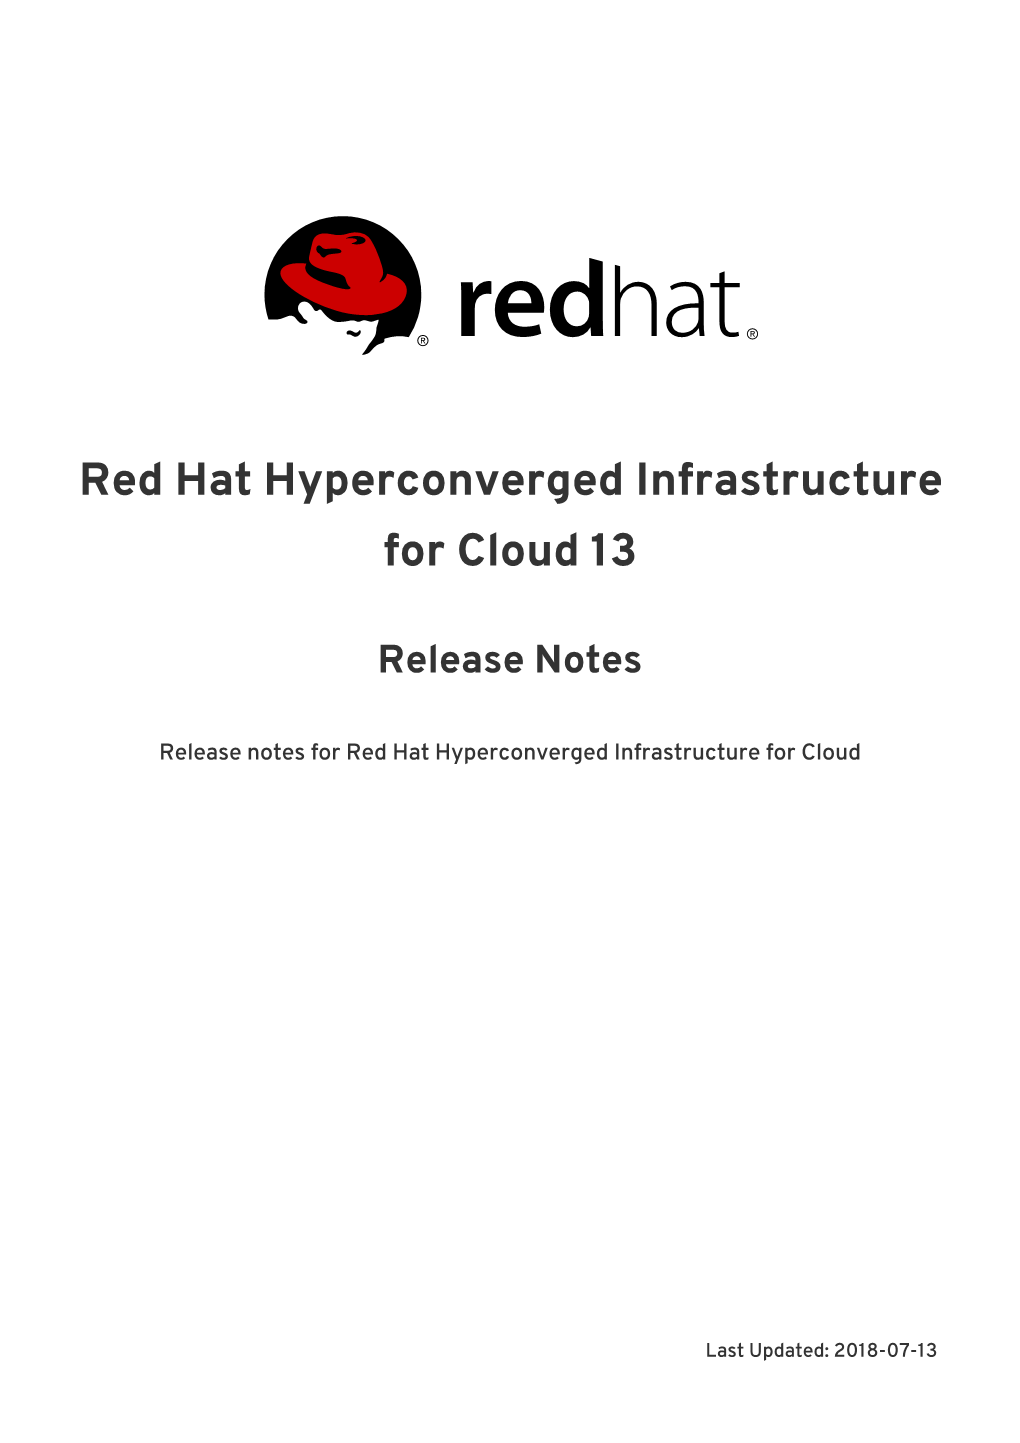 Red Hat Hyperconverged Infrastructure for Cloud 13